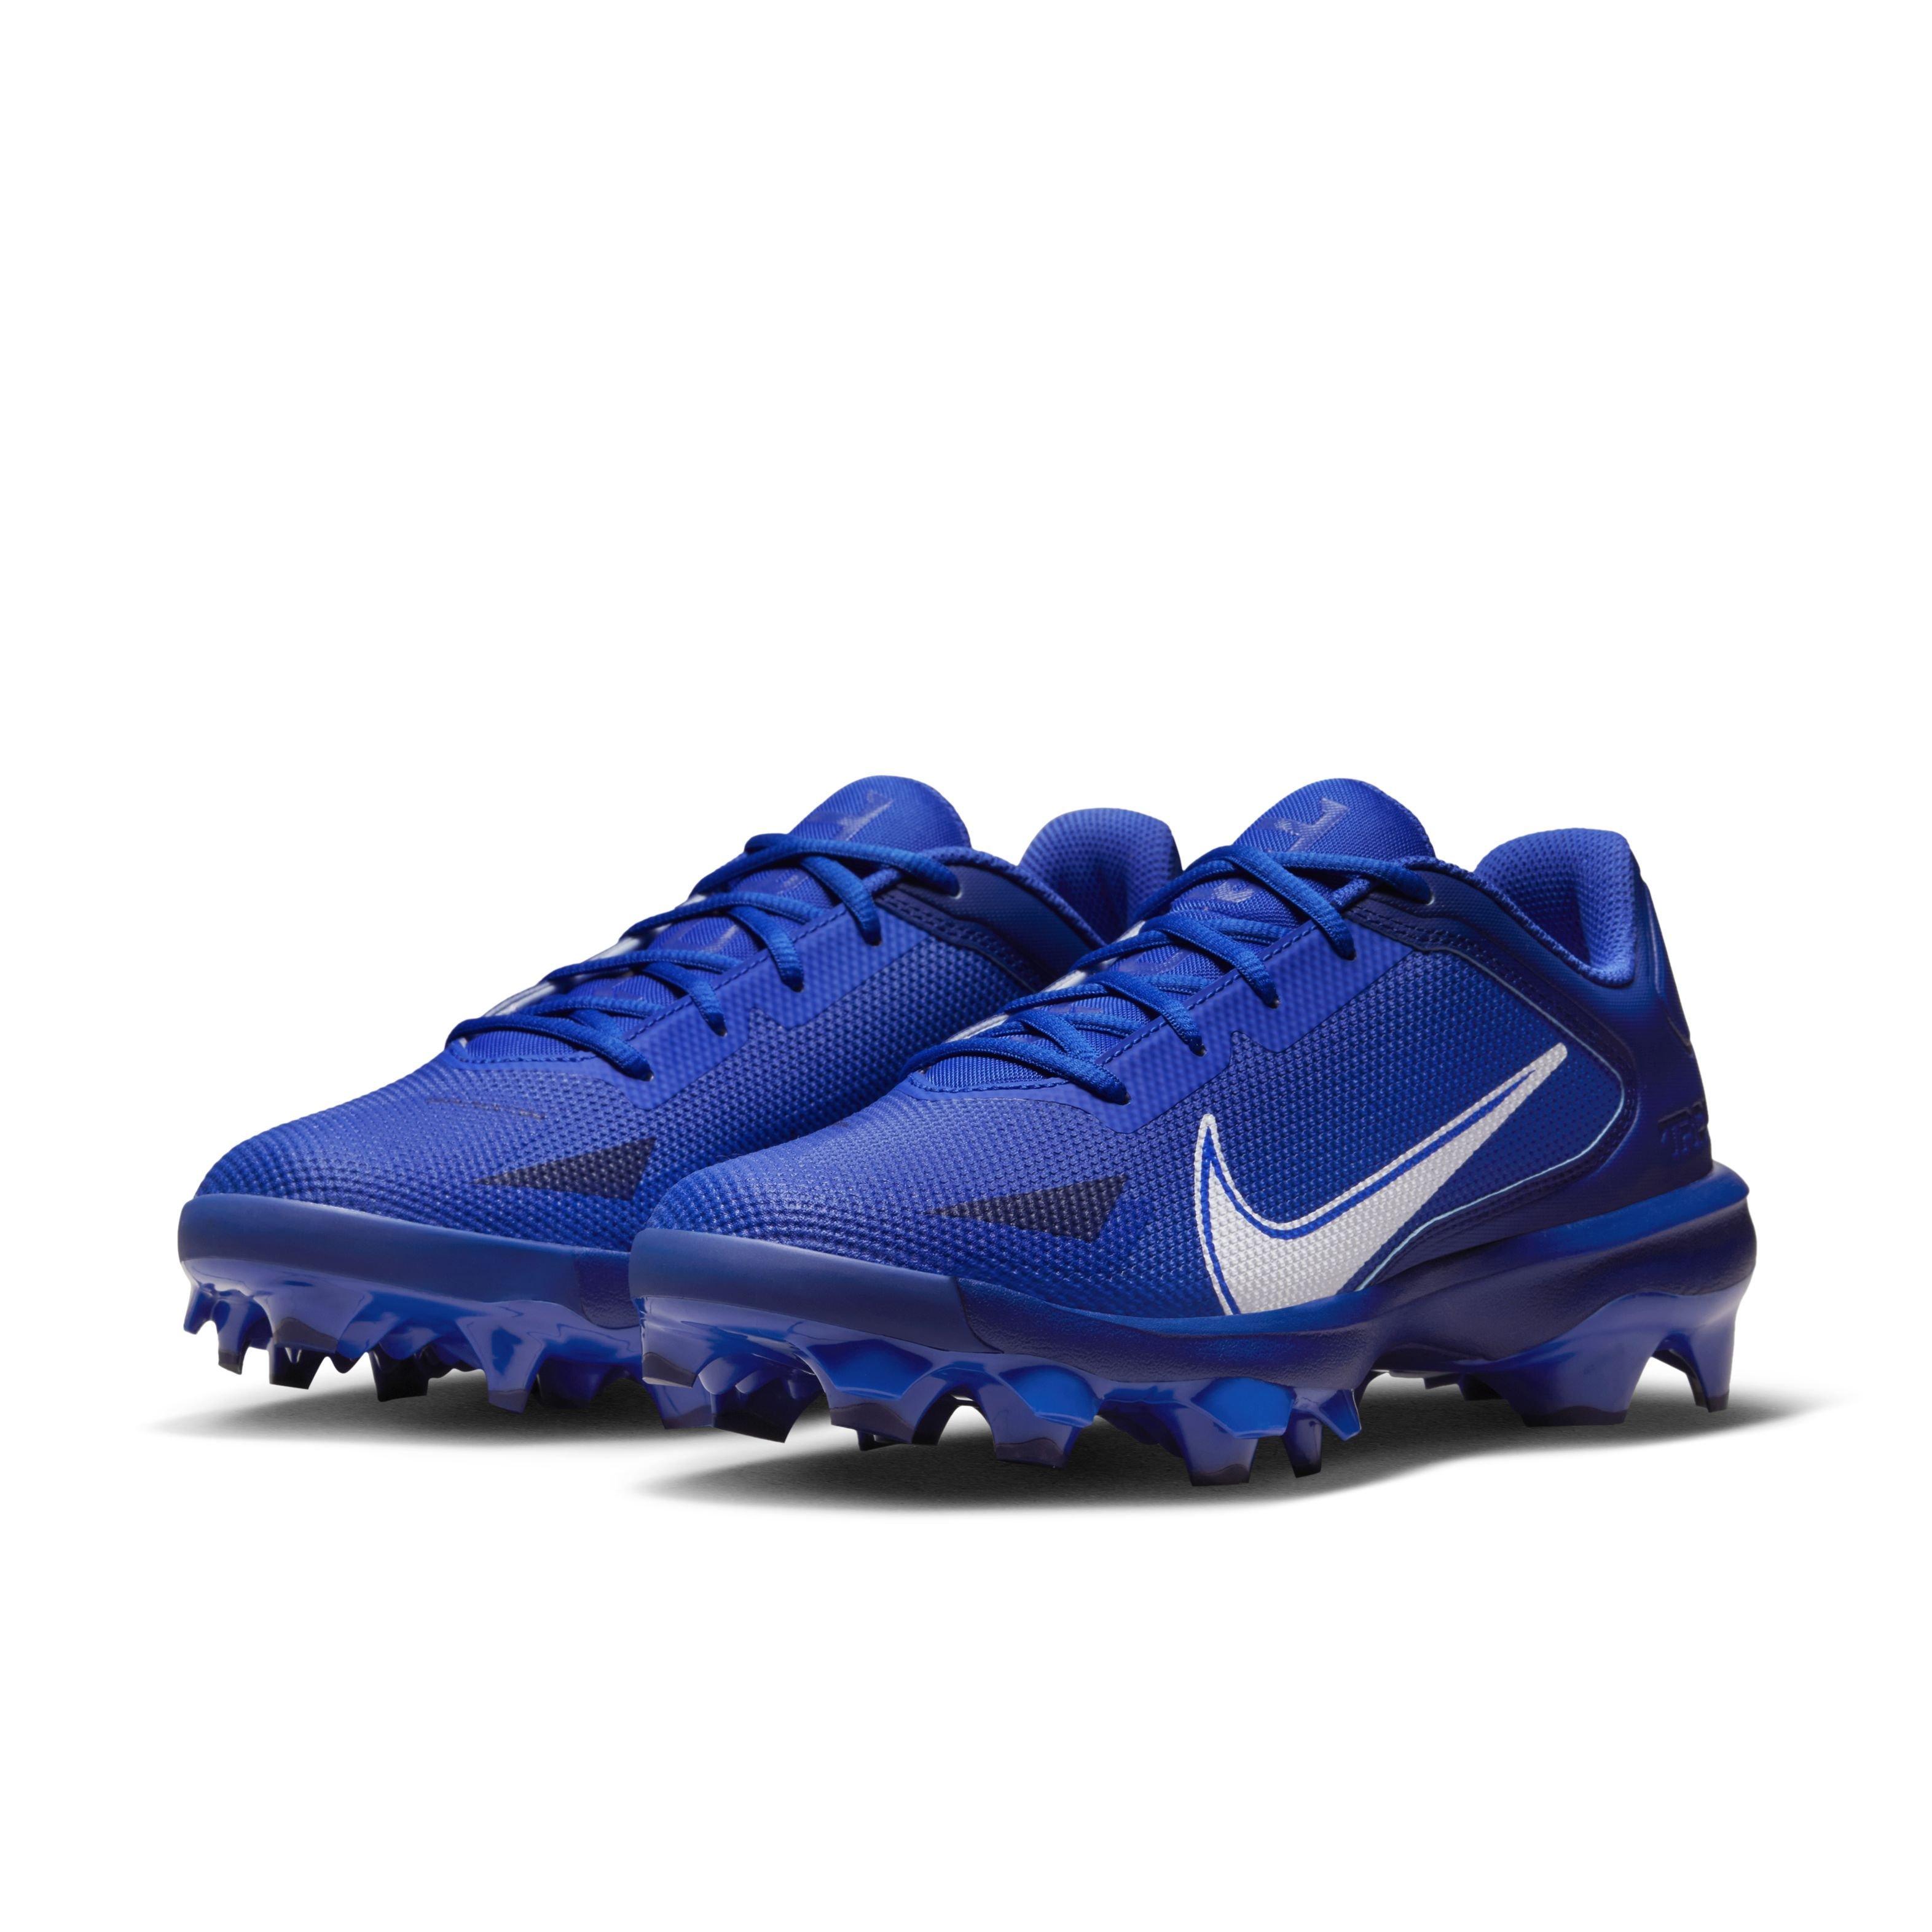 What Pros Wear: Nike Unveils the Force Zoom Trout 6 Cleats and